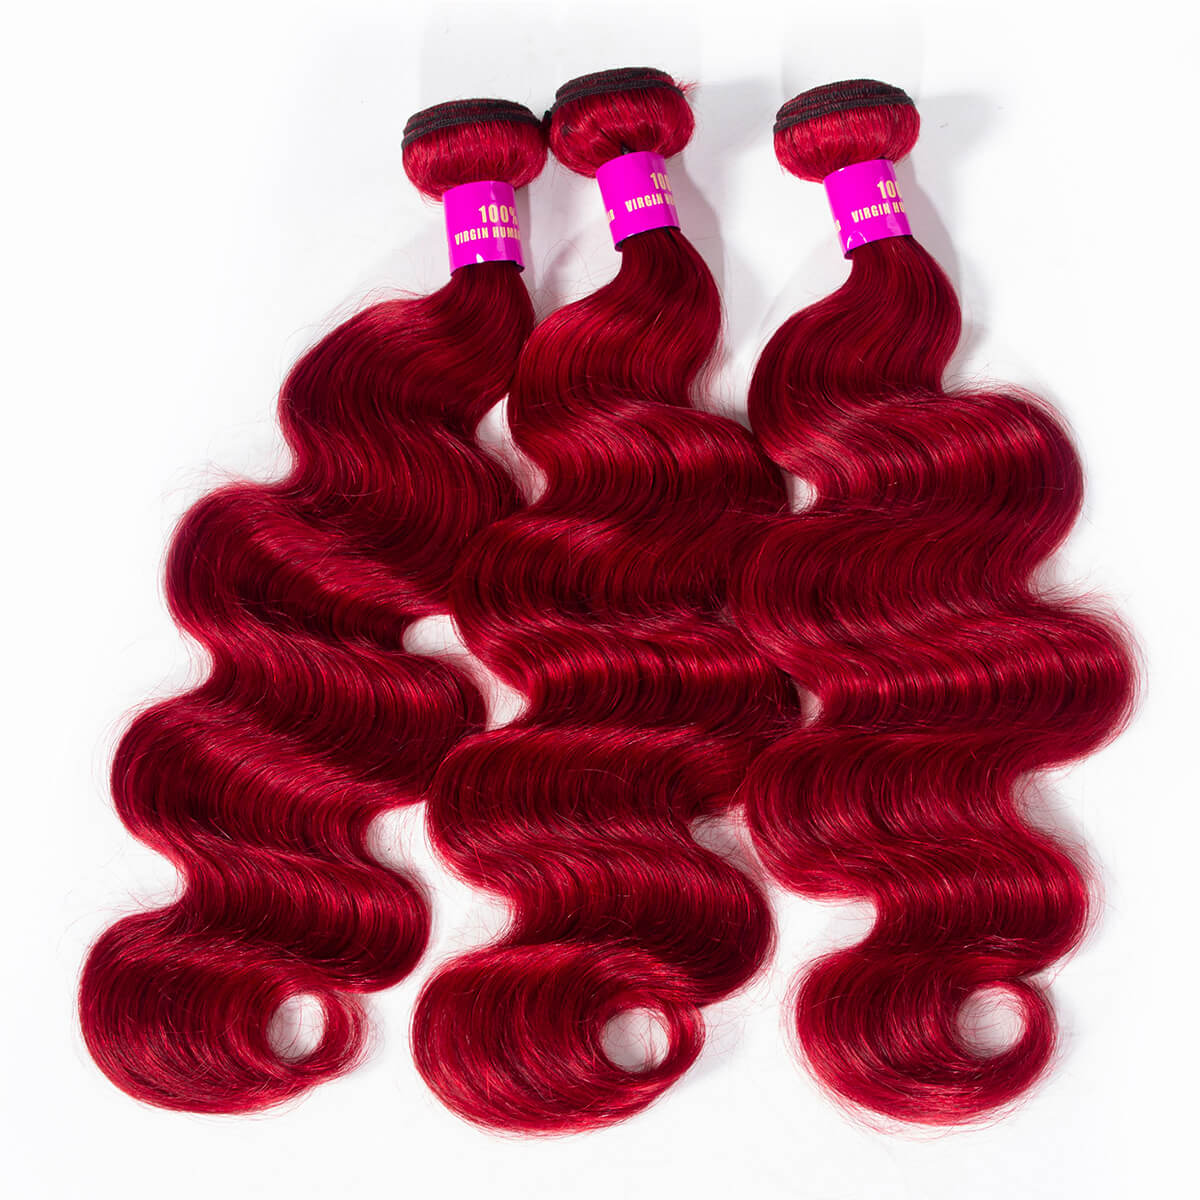 ombre body wave hair,red body wave bundles,red body wave hair,red color hair,red hair,red color body wave,body hair red color,brazilian body hair red color